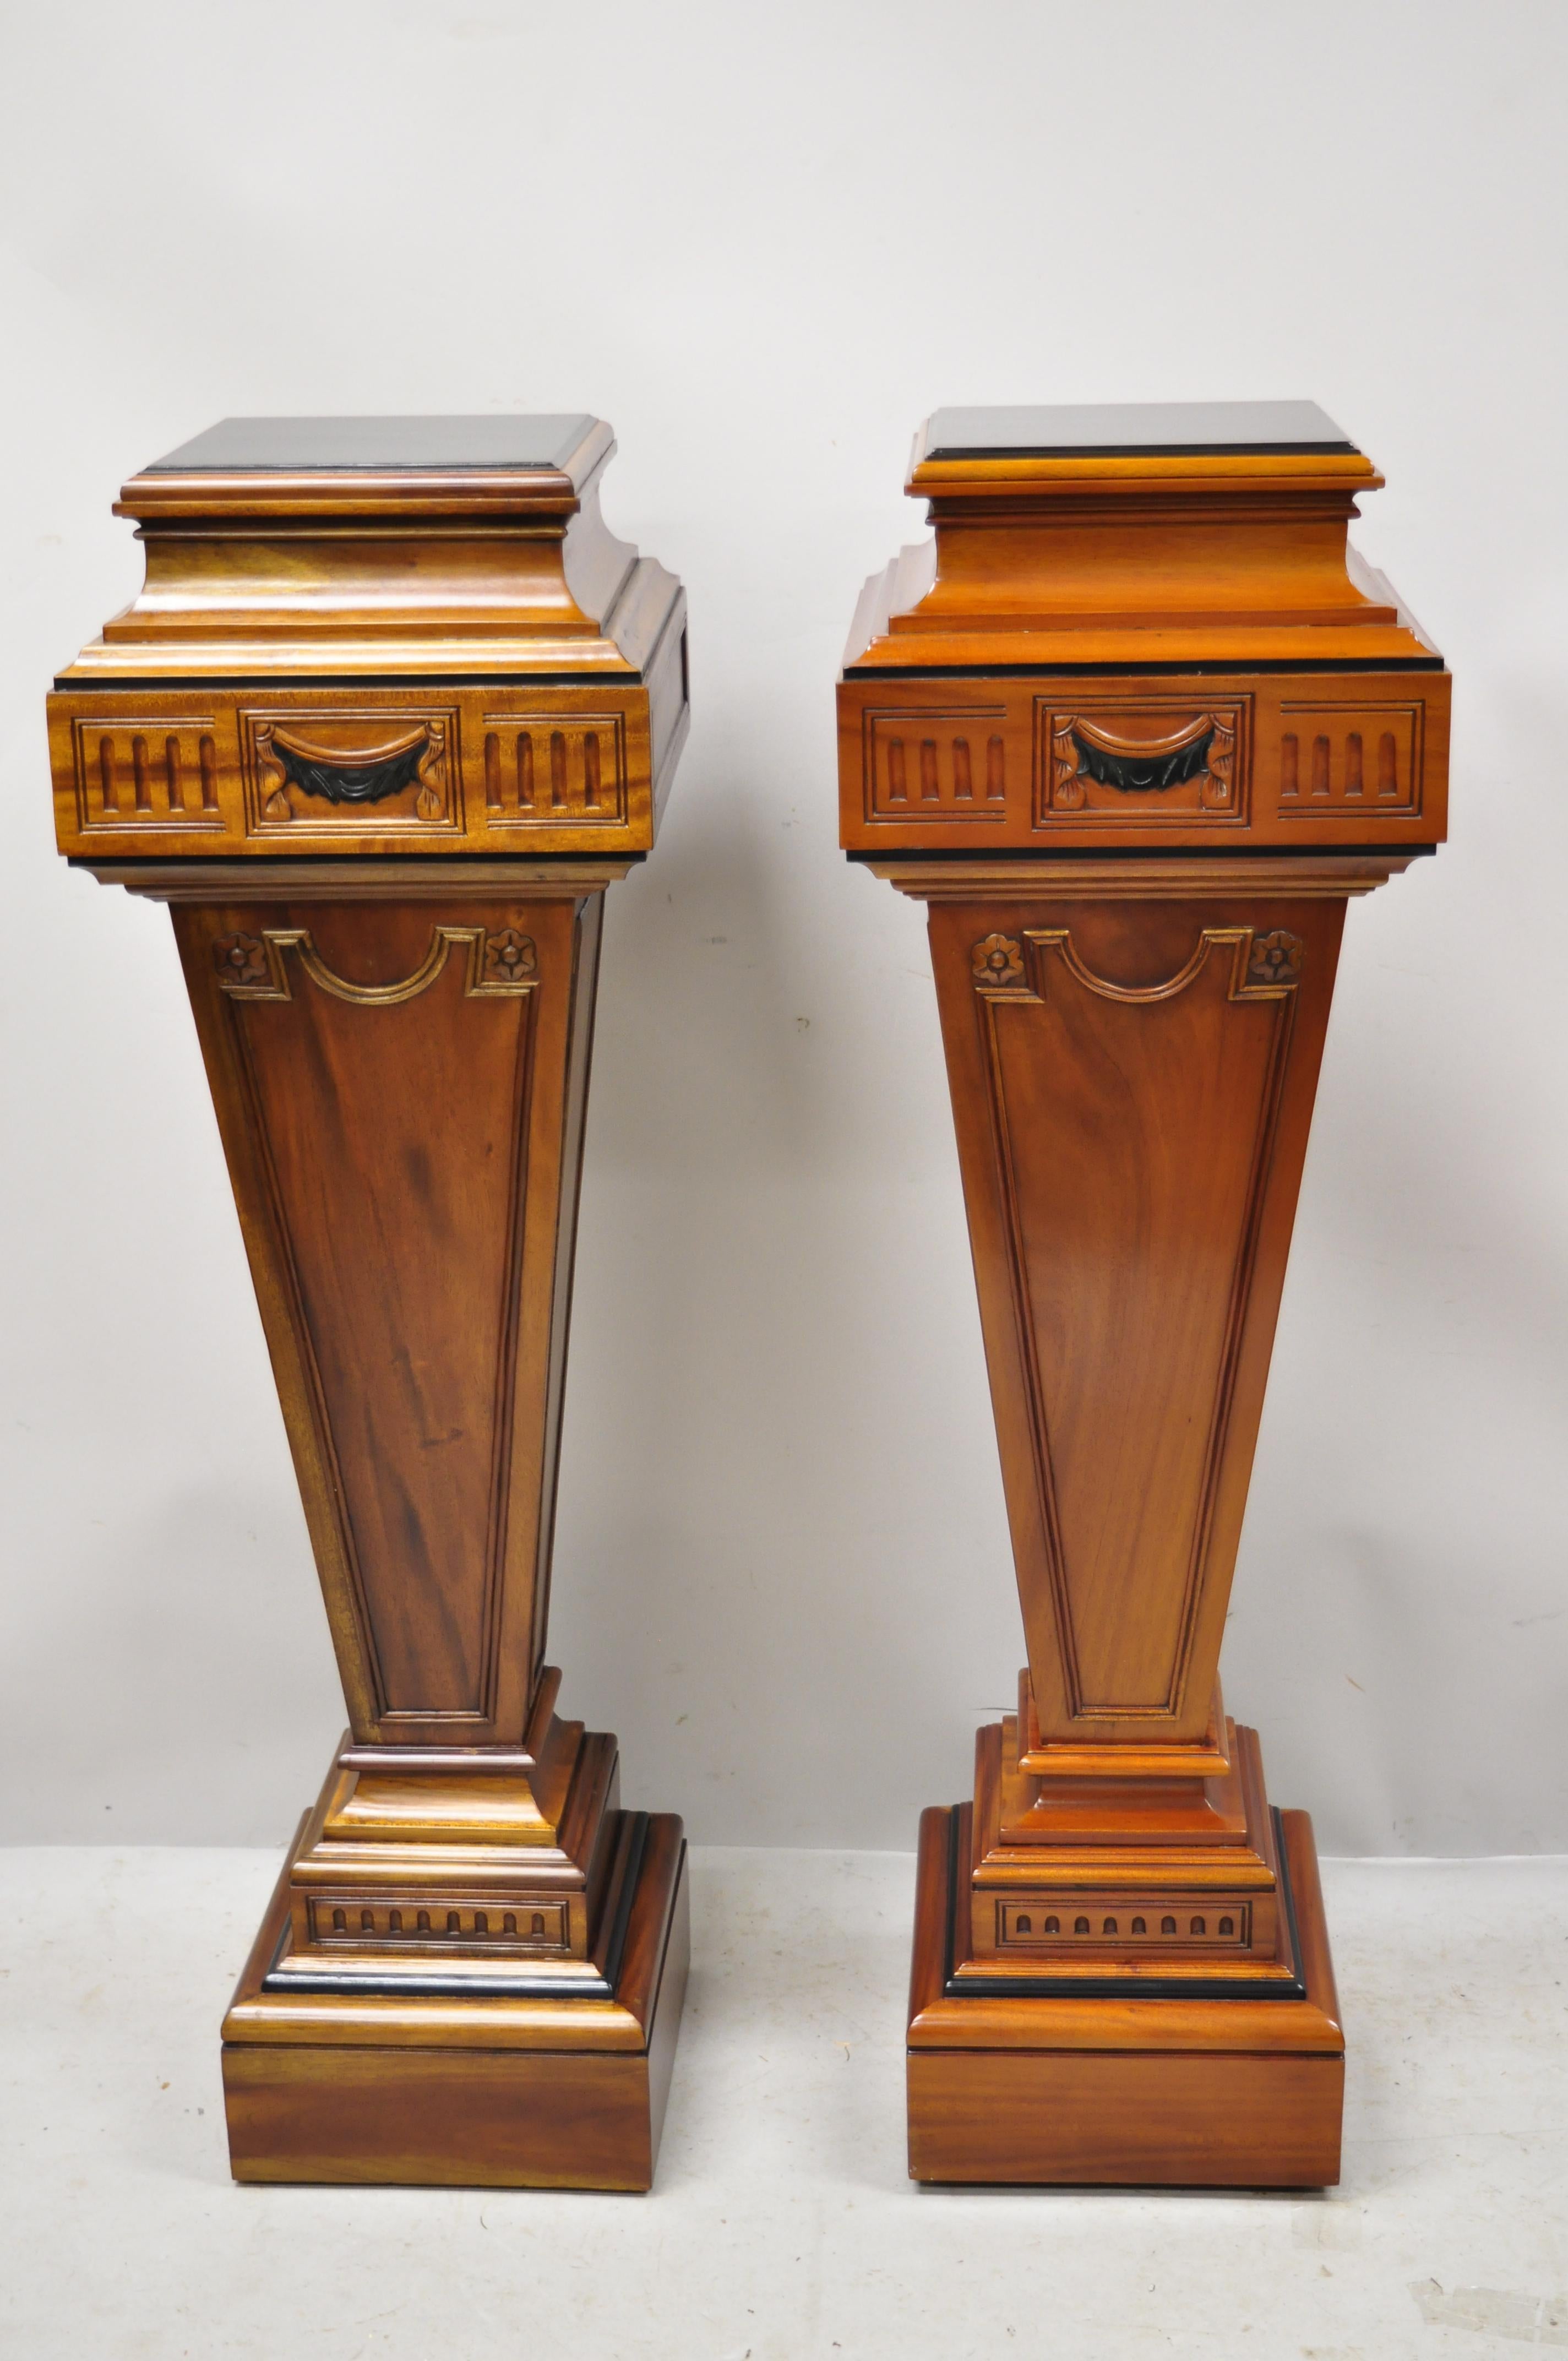 20th Century Empire Neoclassical Mahogany Wood Pedestal Plant Stands, a Pair For Sale 5